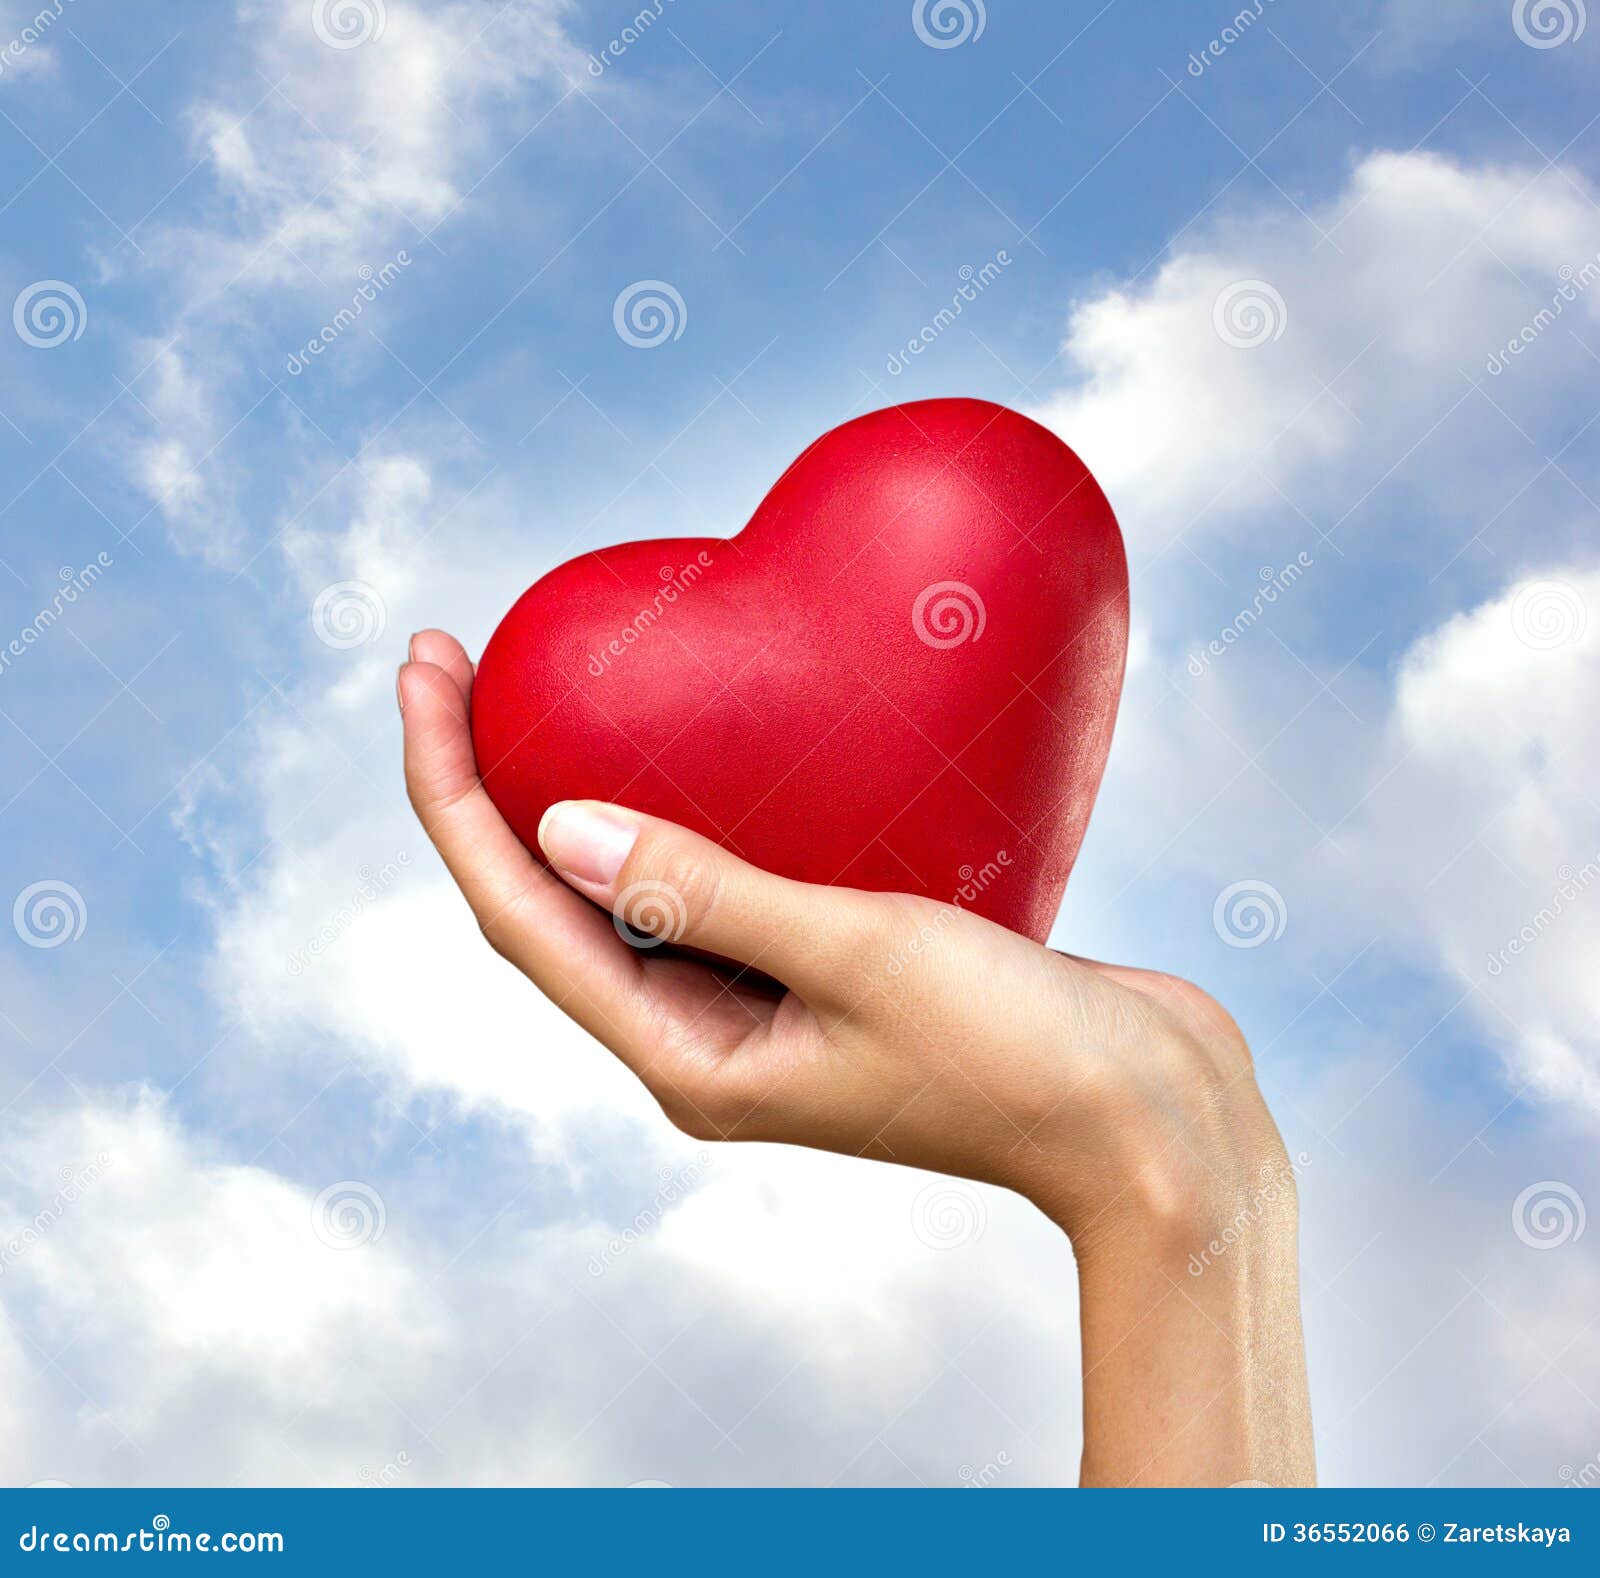 heart-hand-red-womans-blue-sky-clouds-ba